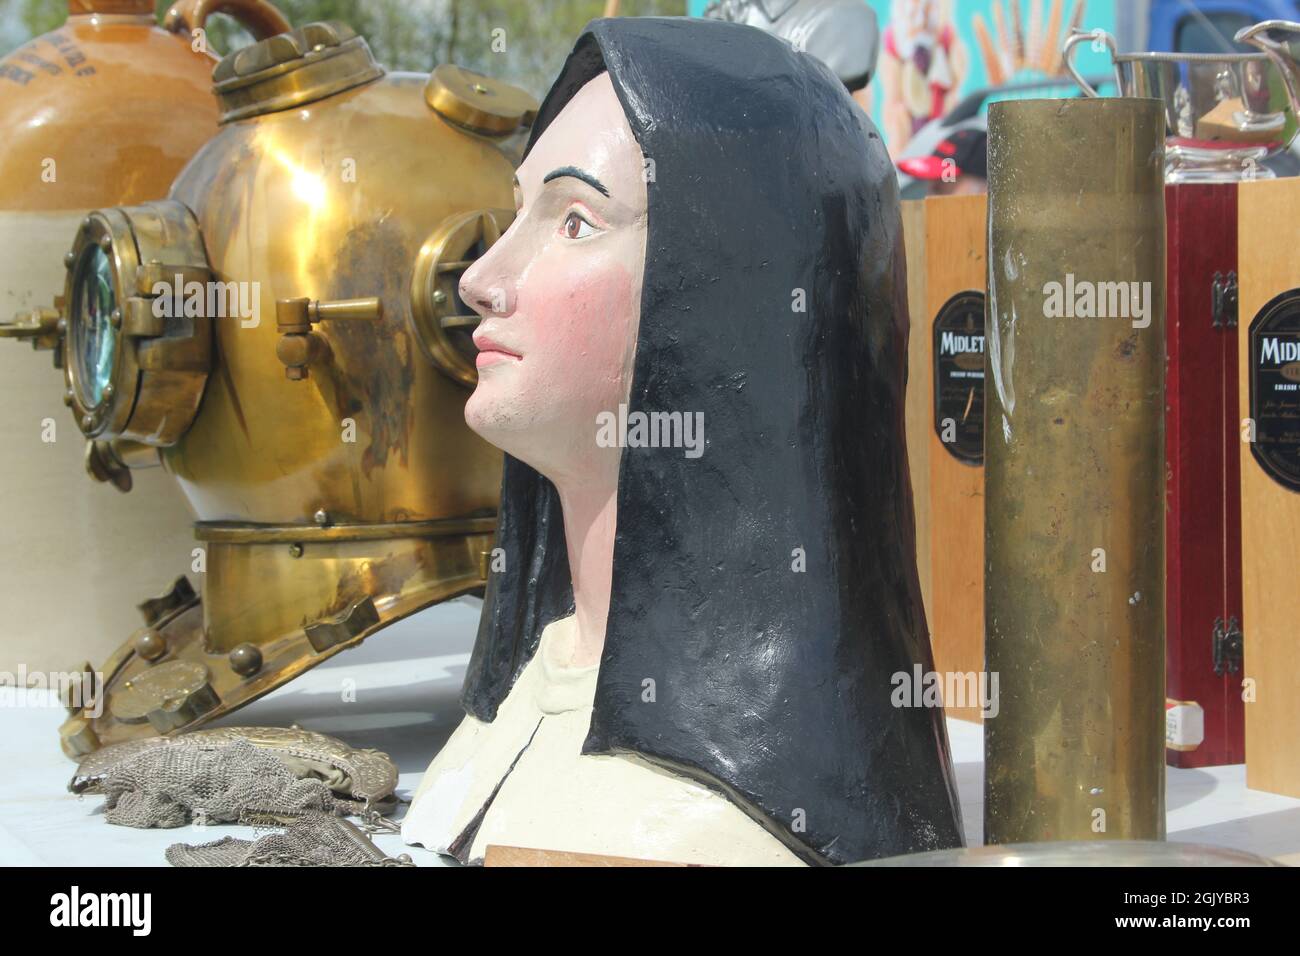 Plaster bust and diving helmet at car boot sale Stock Photo